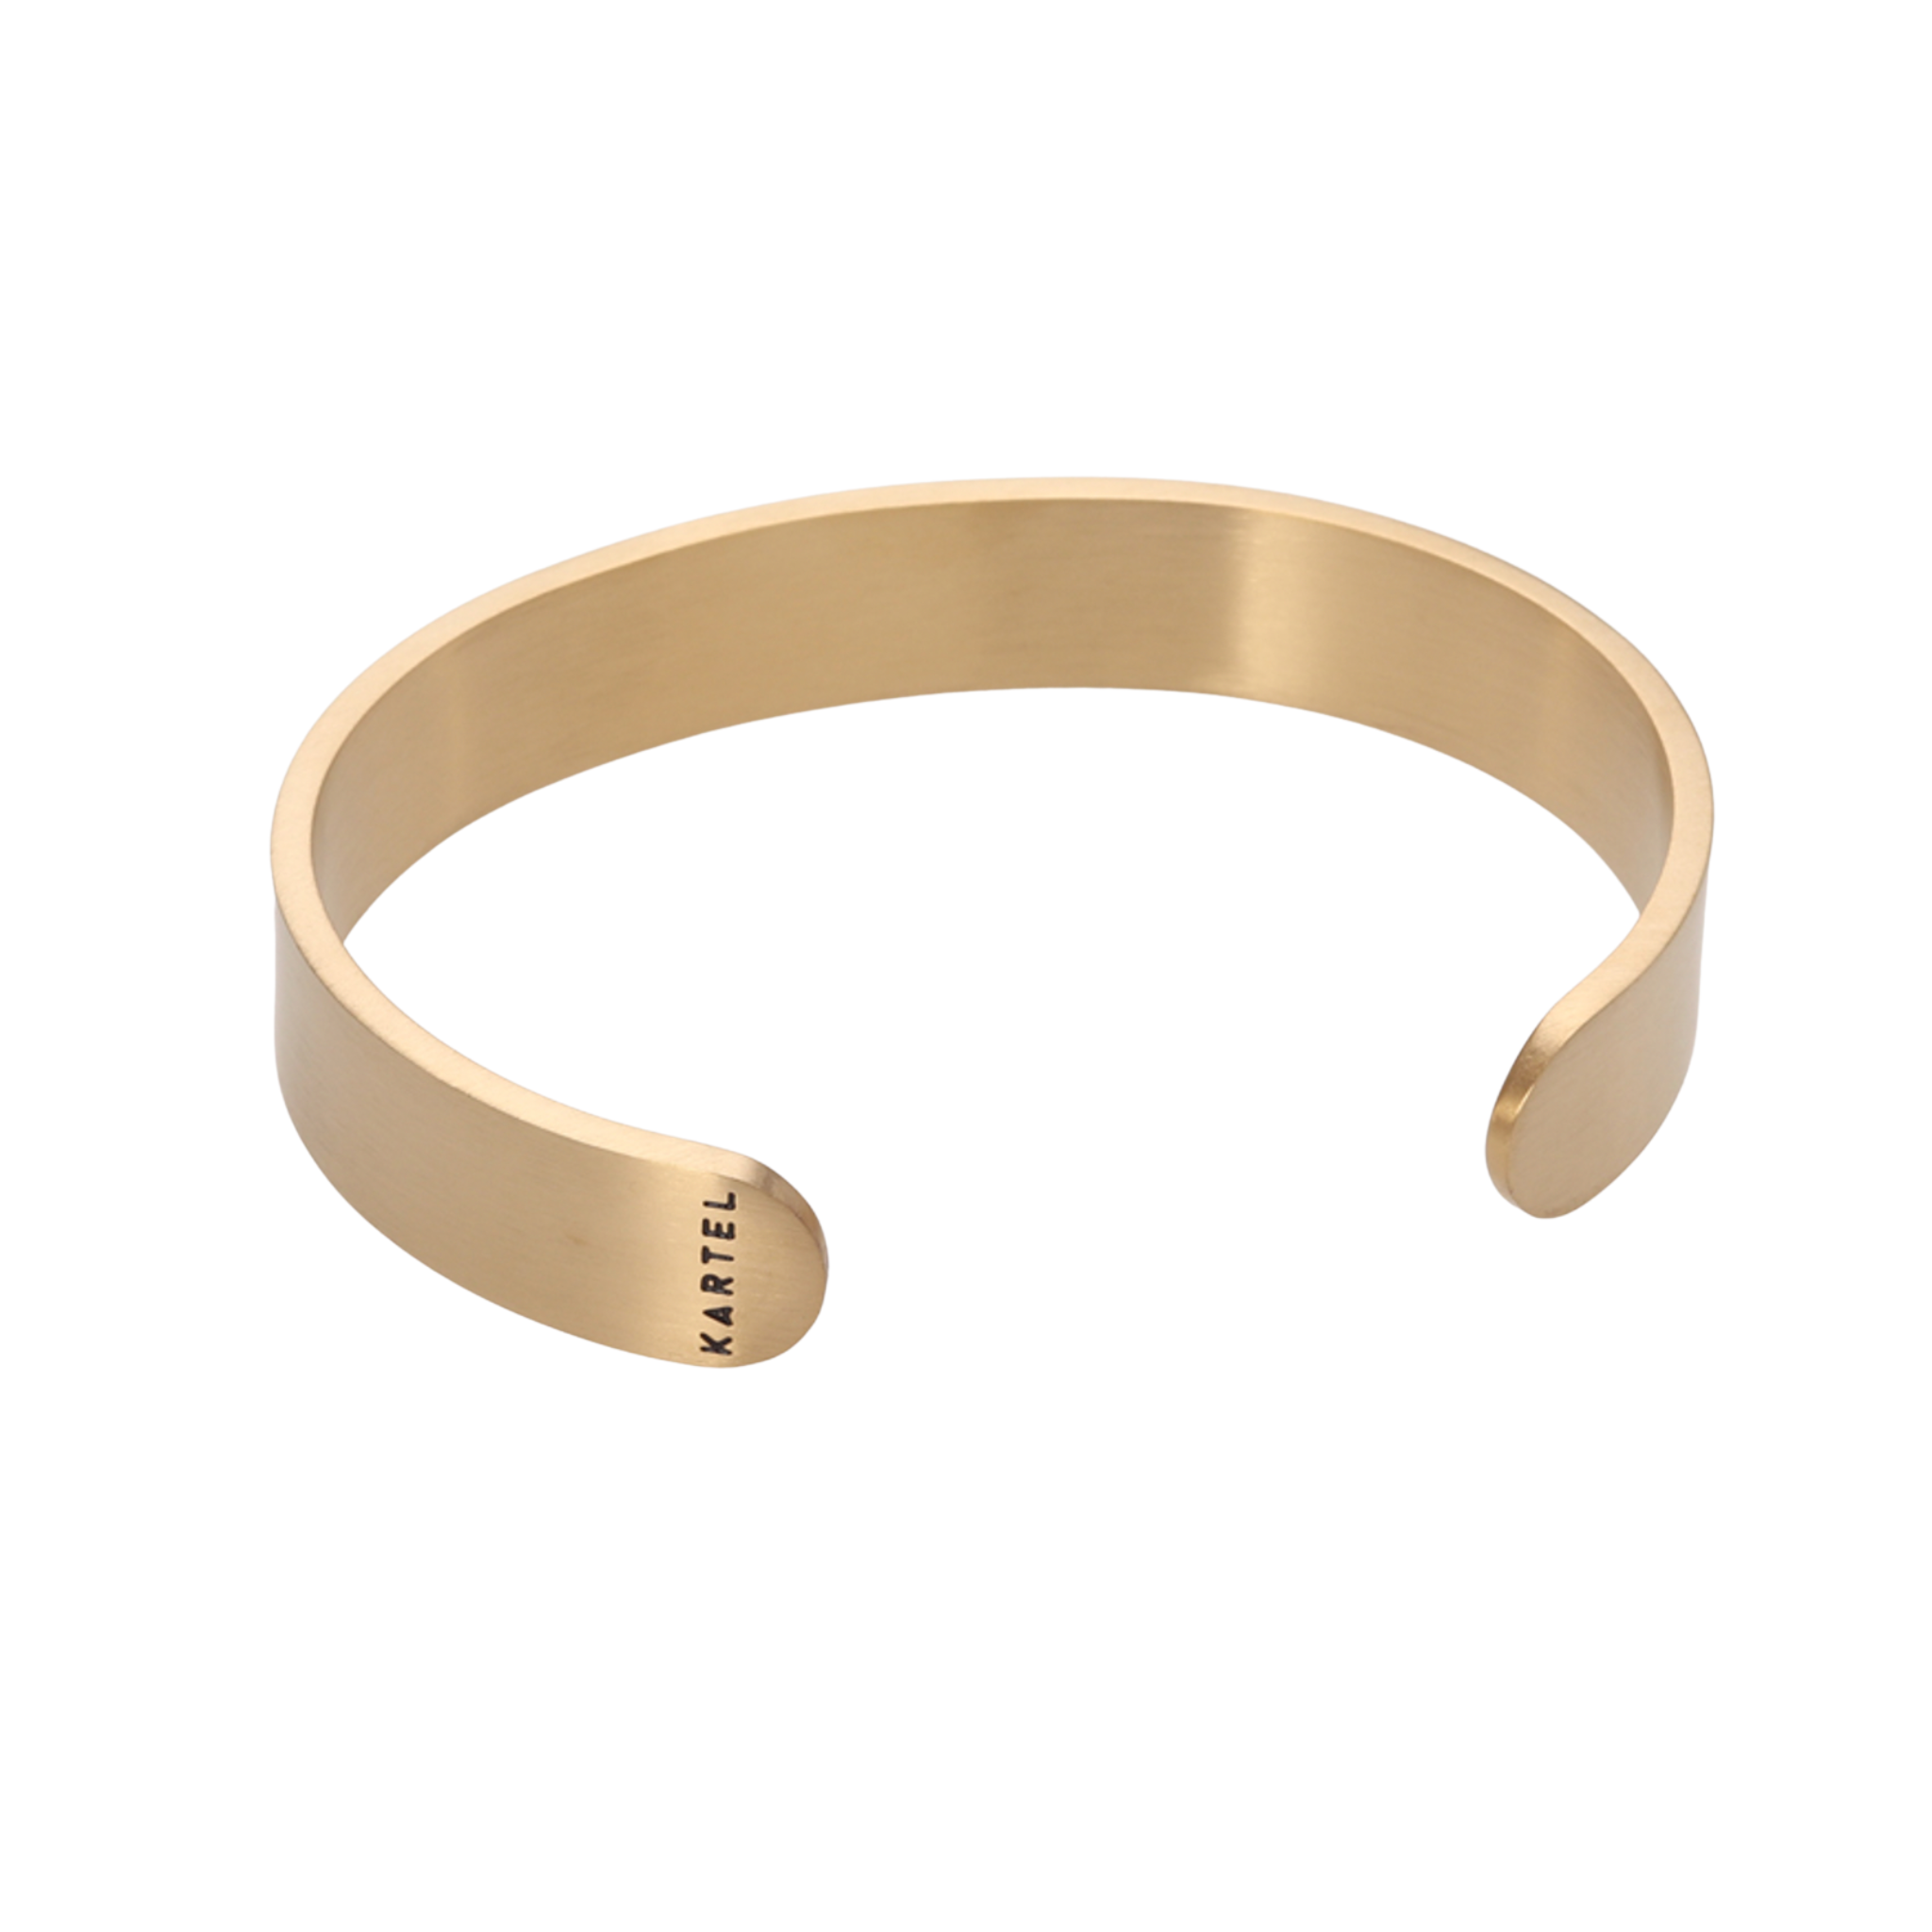 Brushed Gold Steel Cuff - 4 Sizes